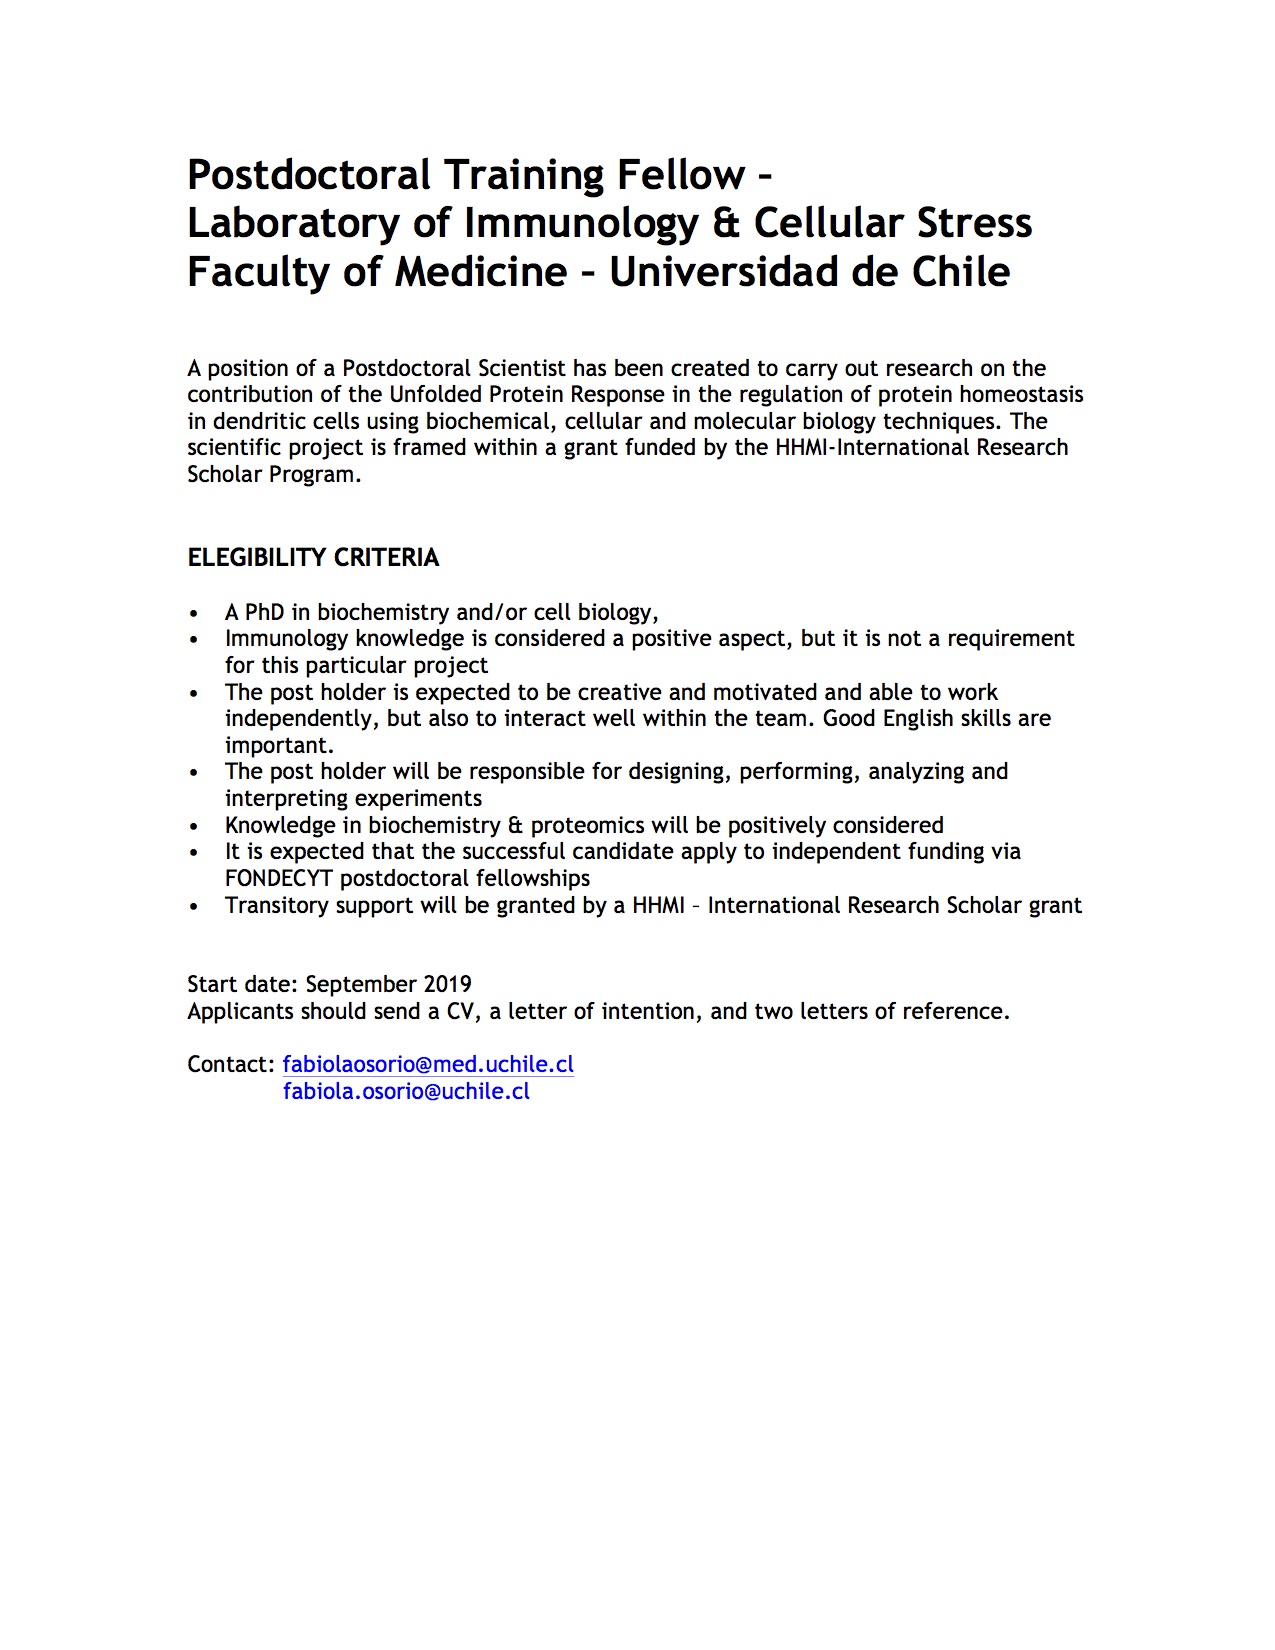 Postdoctoral Training Fellow – Laboratory of Immunology & Cellular Stress Faculty of Medicine – Universidad de Chile graphic